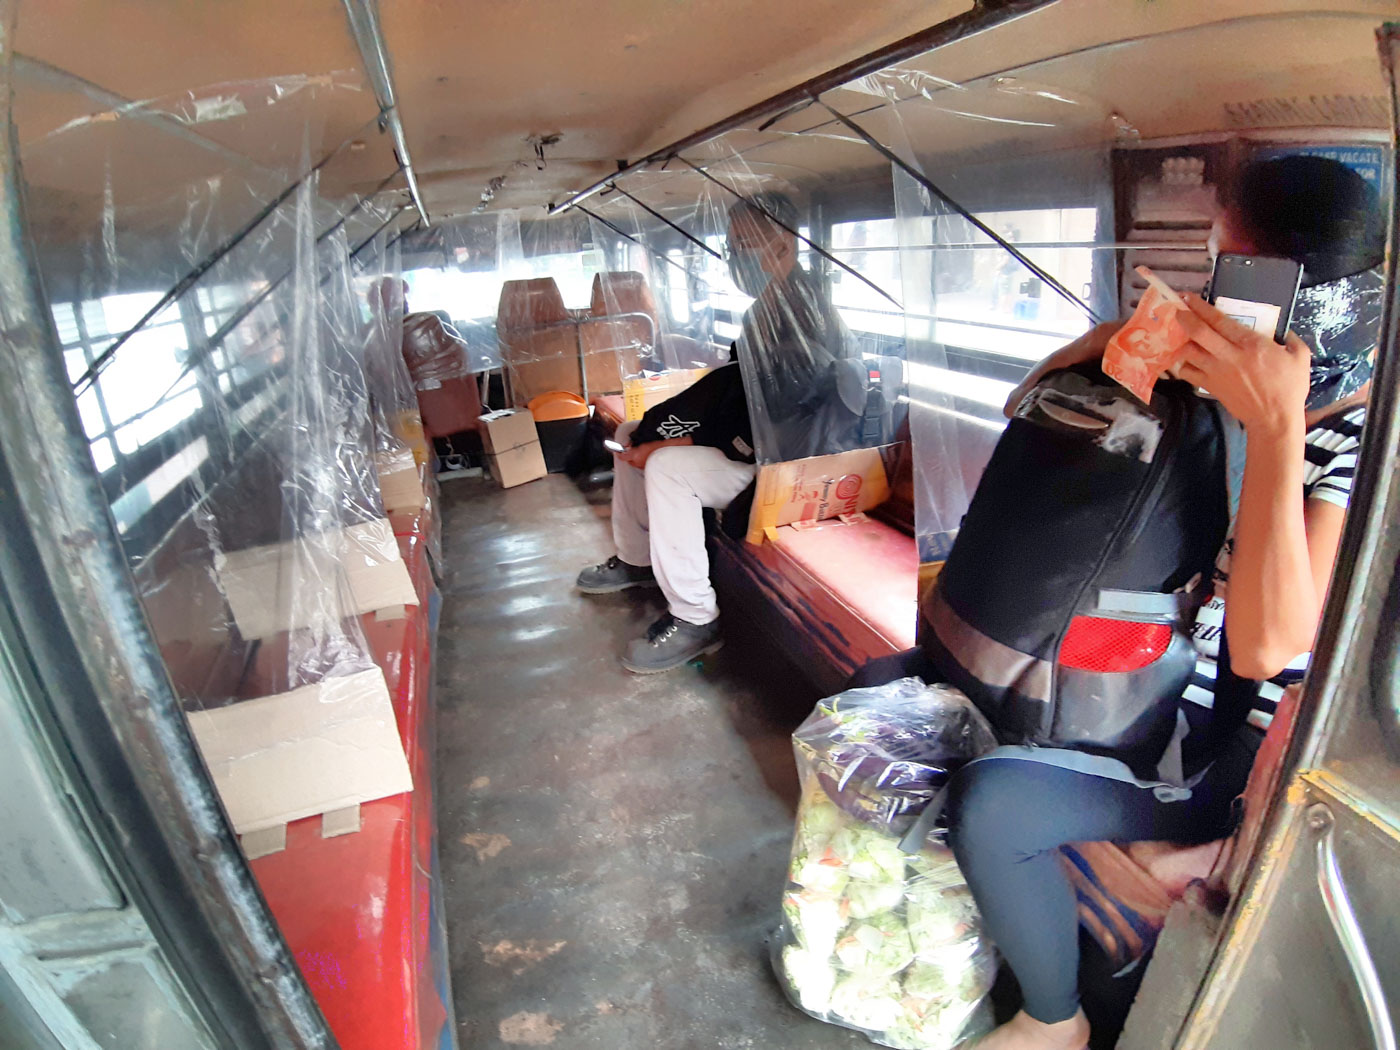 DIVIDERS. A jeepney in Trancoville, Baguio City puts up plastic covers to divide passengers. Photo by Mau Victa/Rappler 